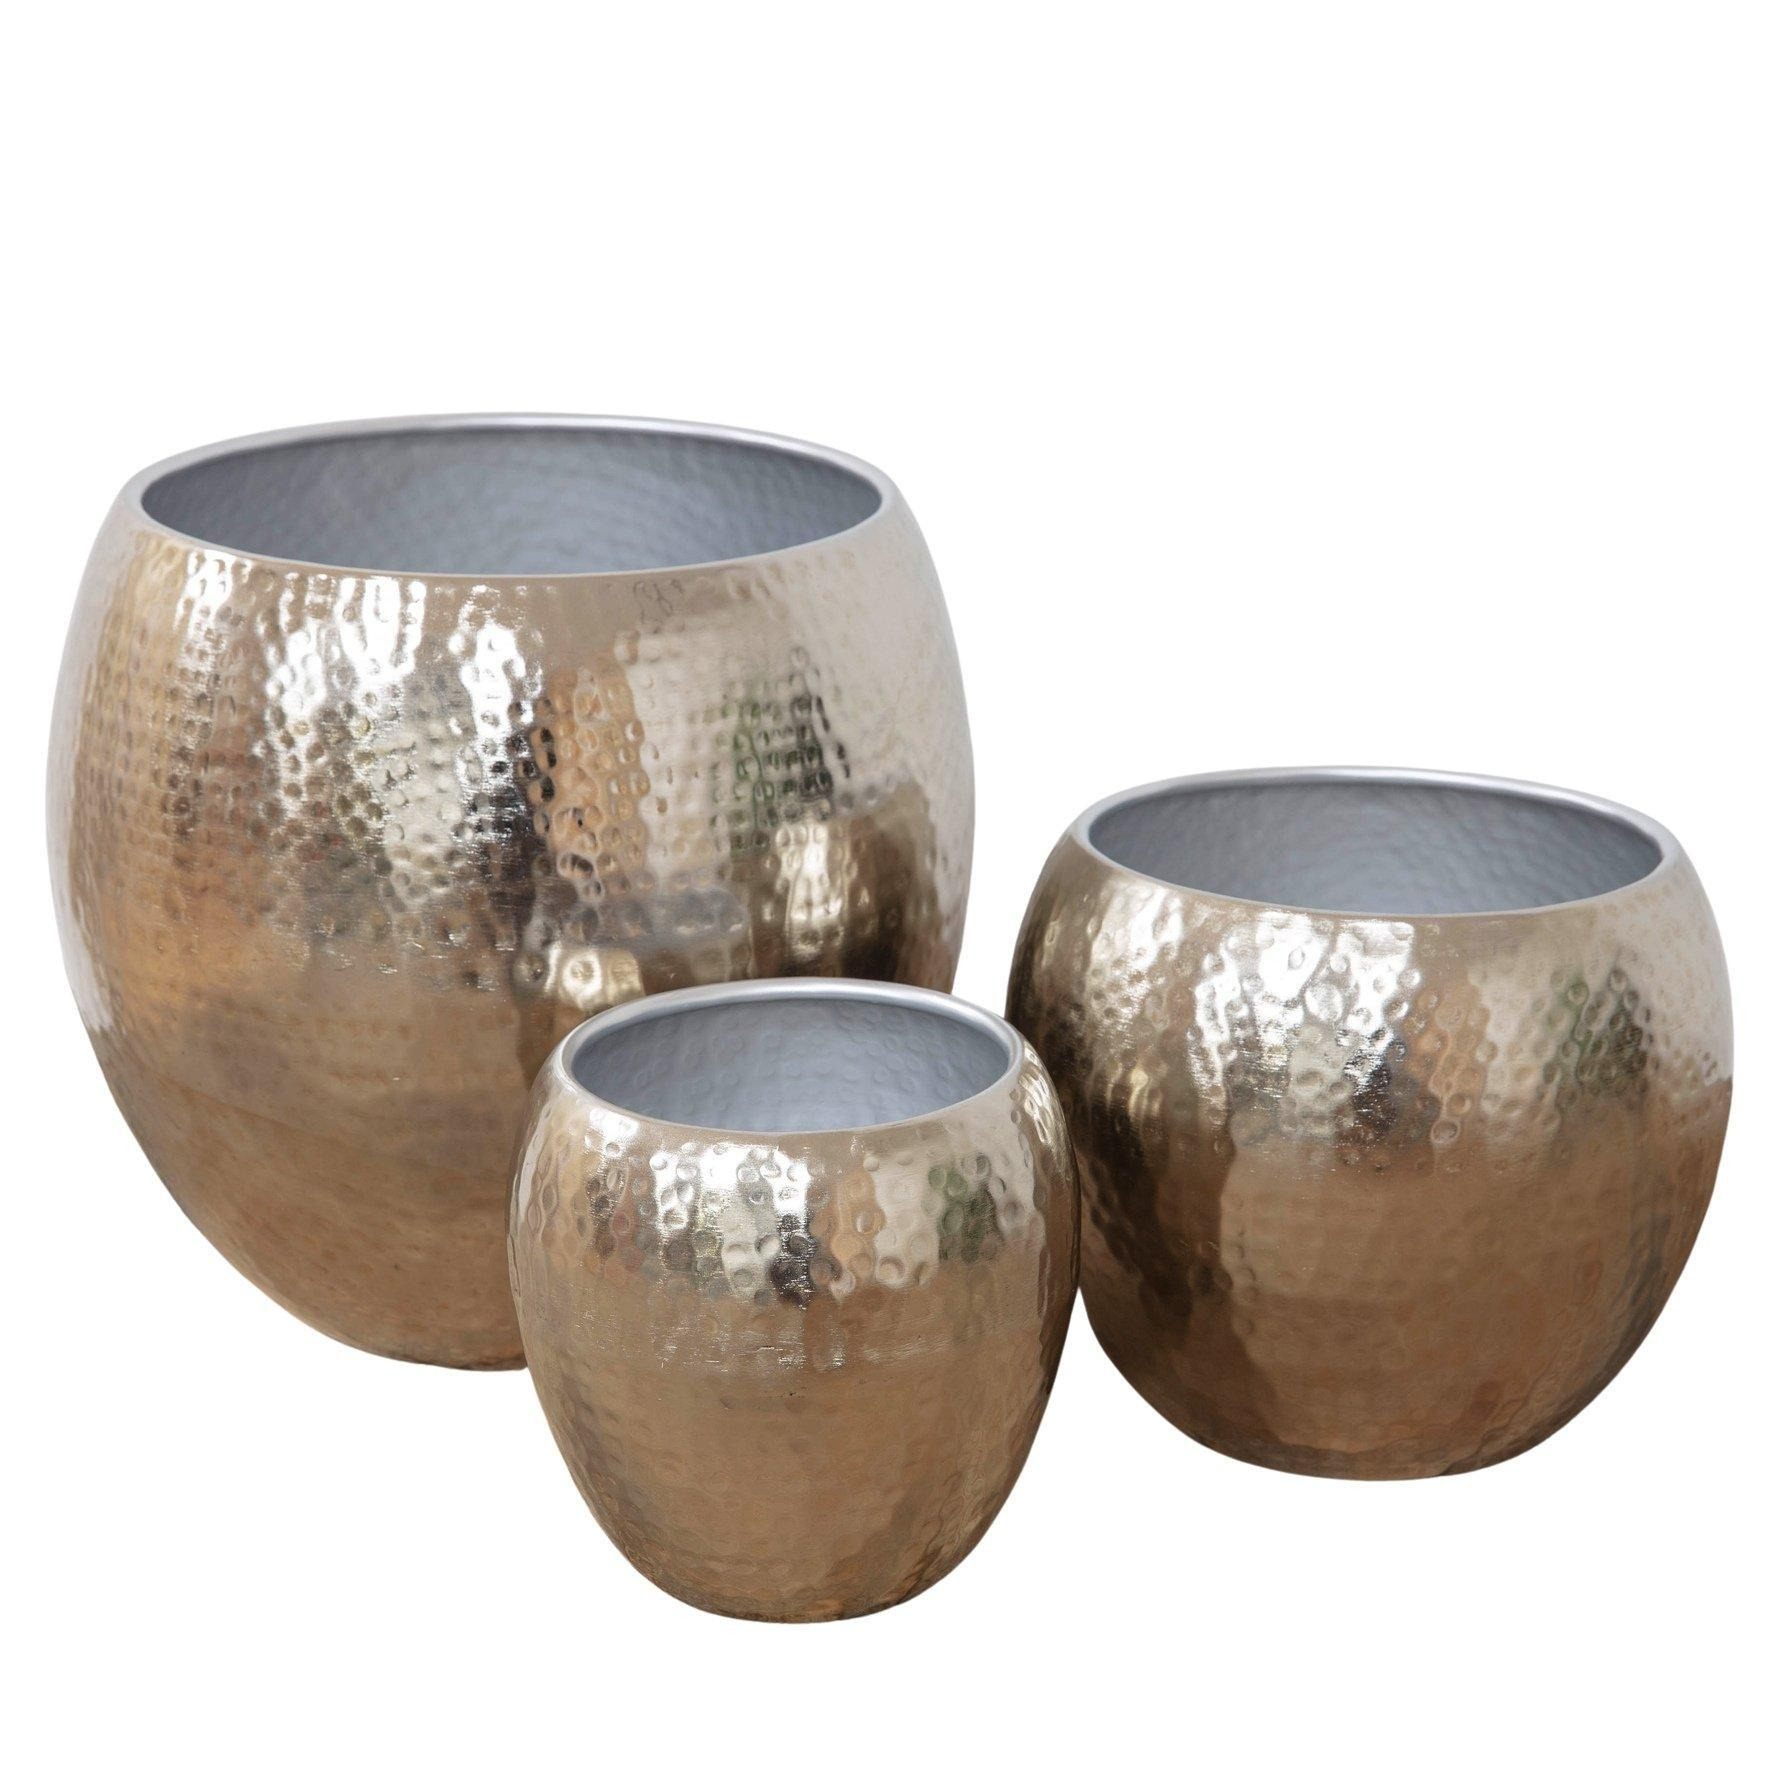 Set of 3 Textured Silver Metal Planters - image 1